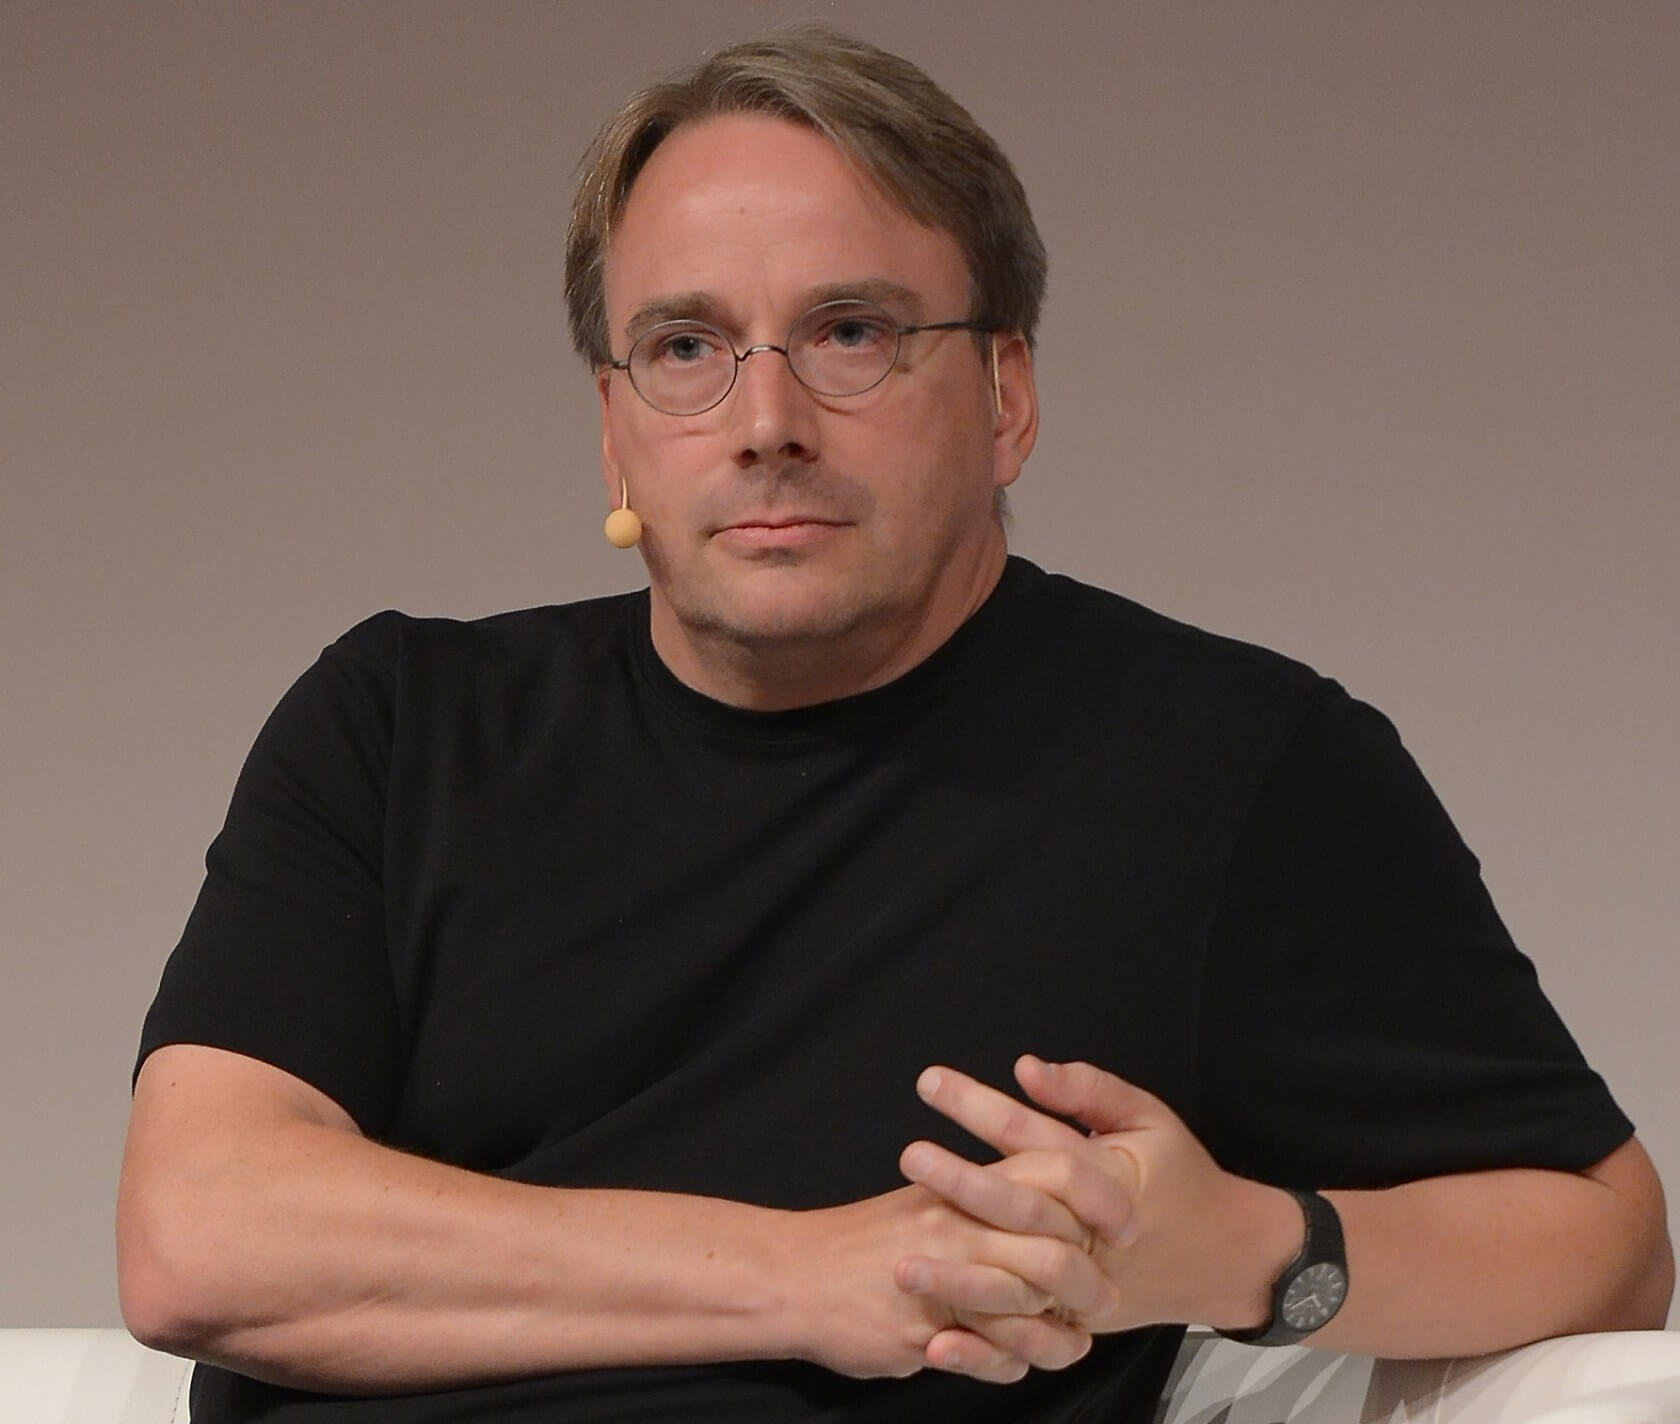 Linus Torvalds returns to Linux project after time off to address his behavior